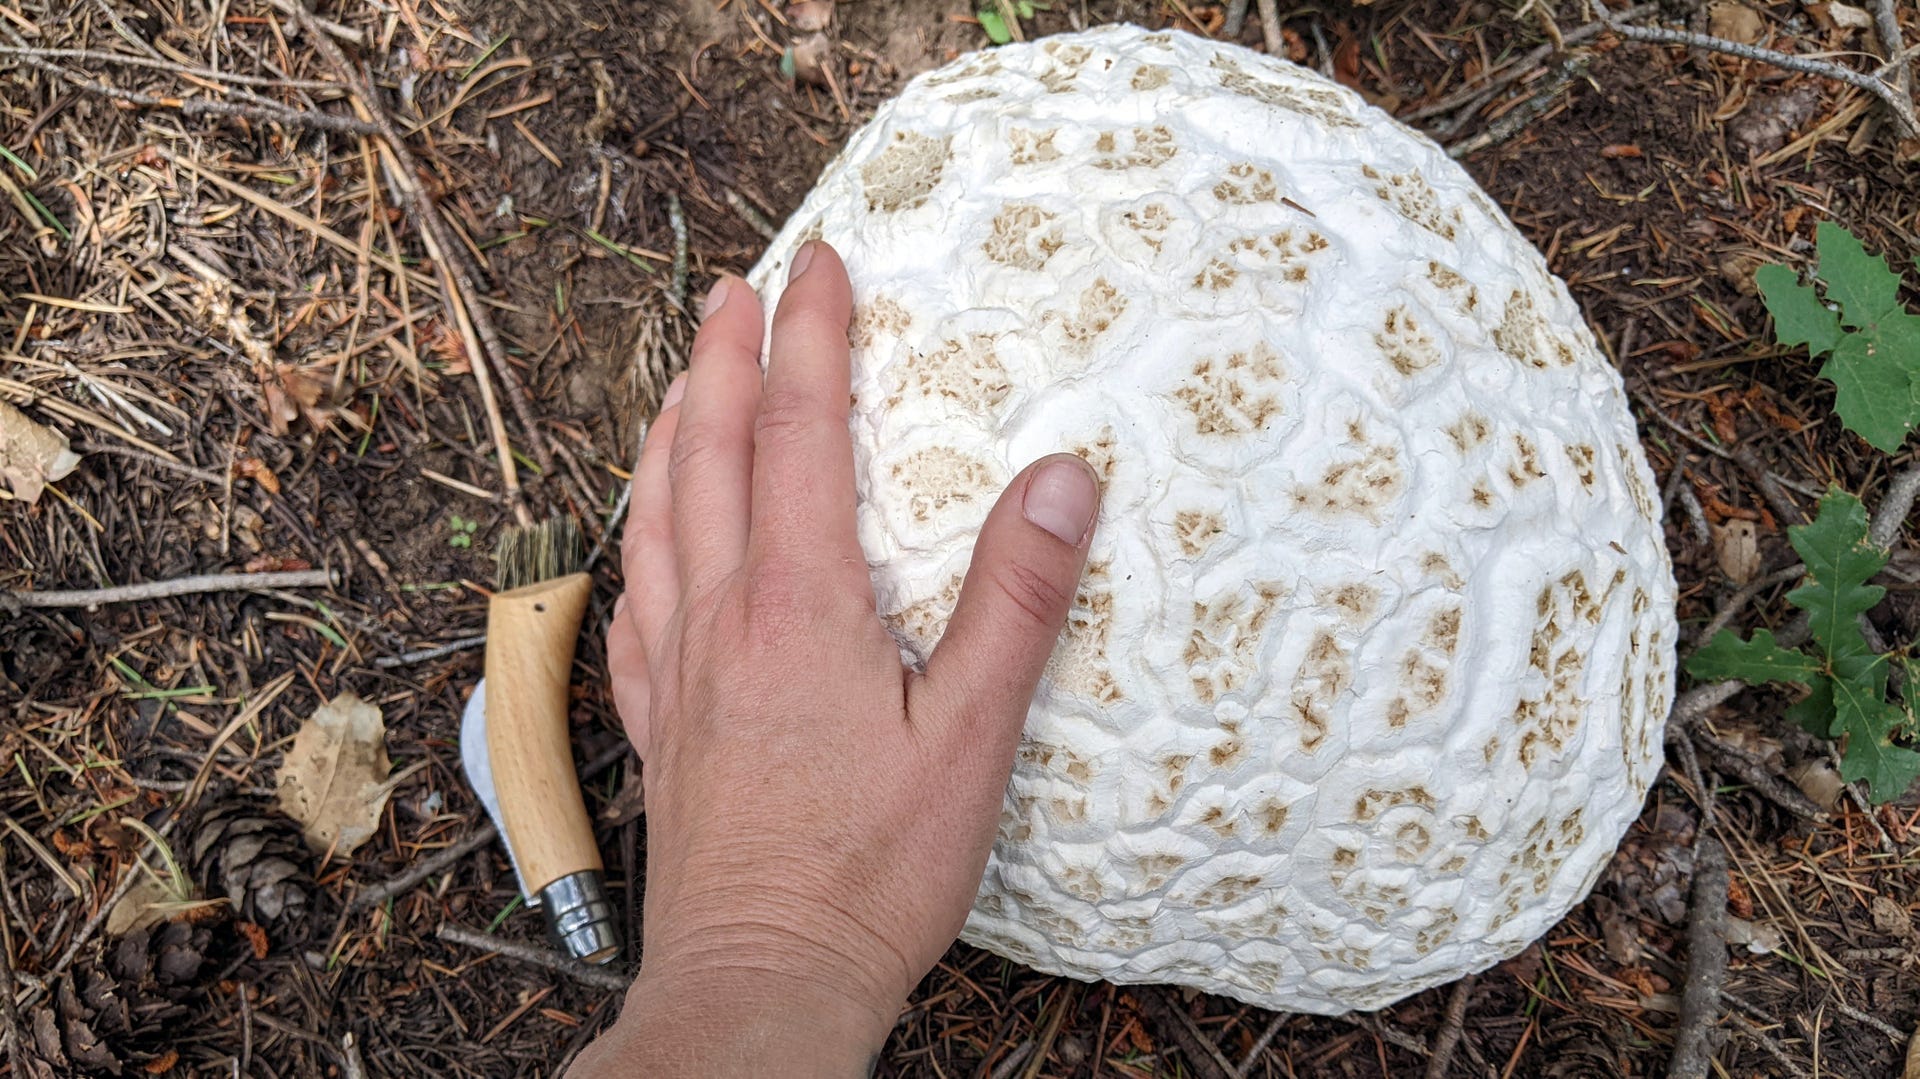 Massive, warty-looking roundish whitish puffball mushroom with a human hand on part of it.